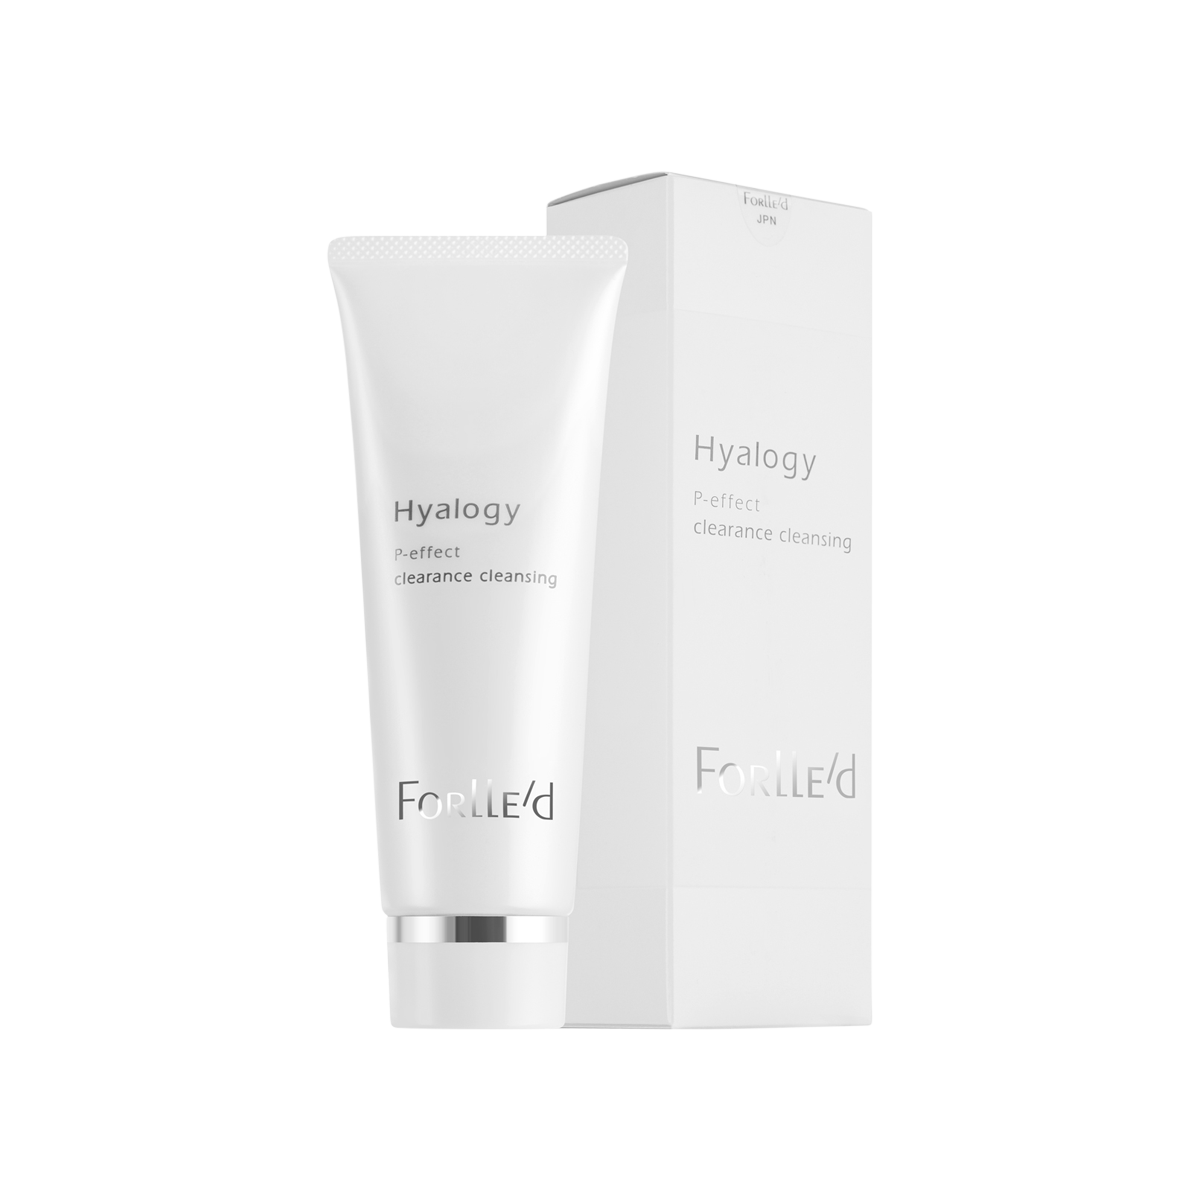 Forlle'd - Hyalogy P-Effect Clearance Cleansing